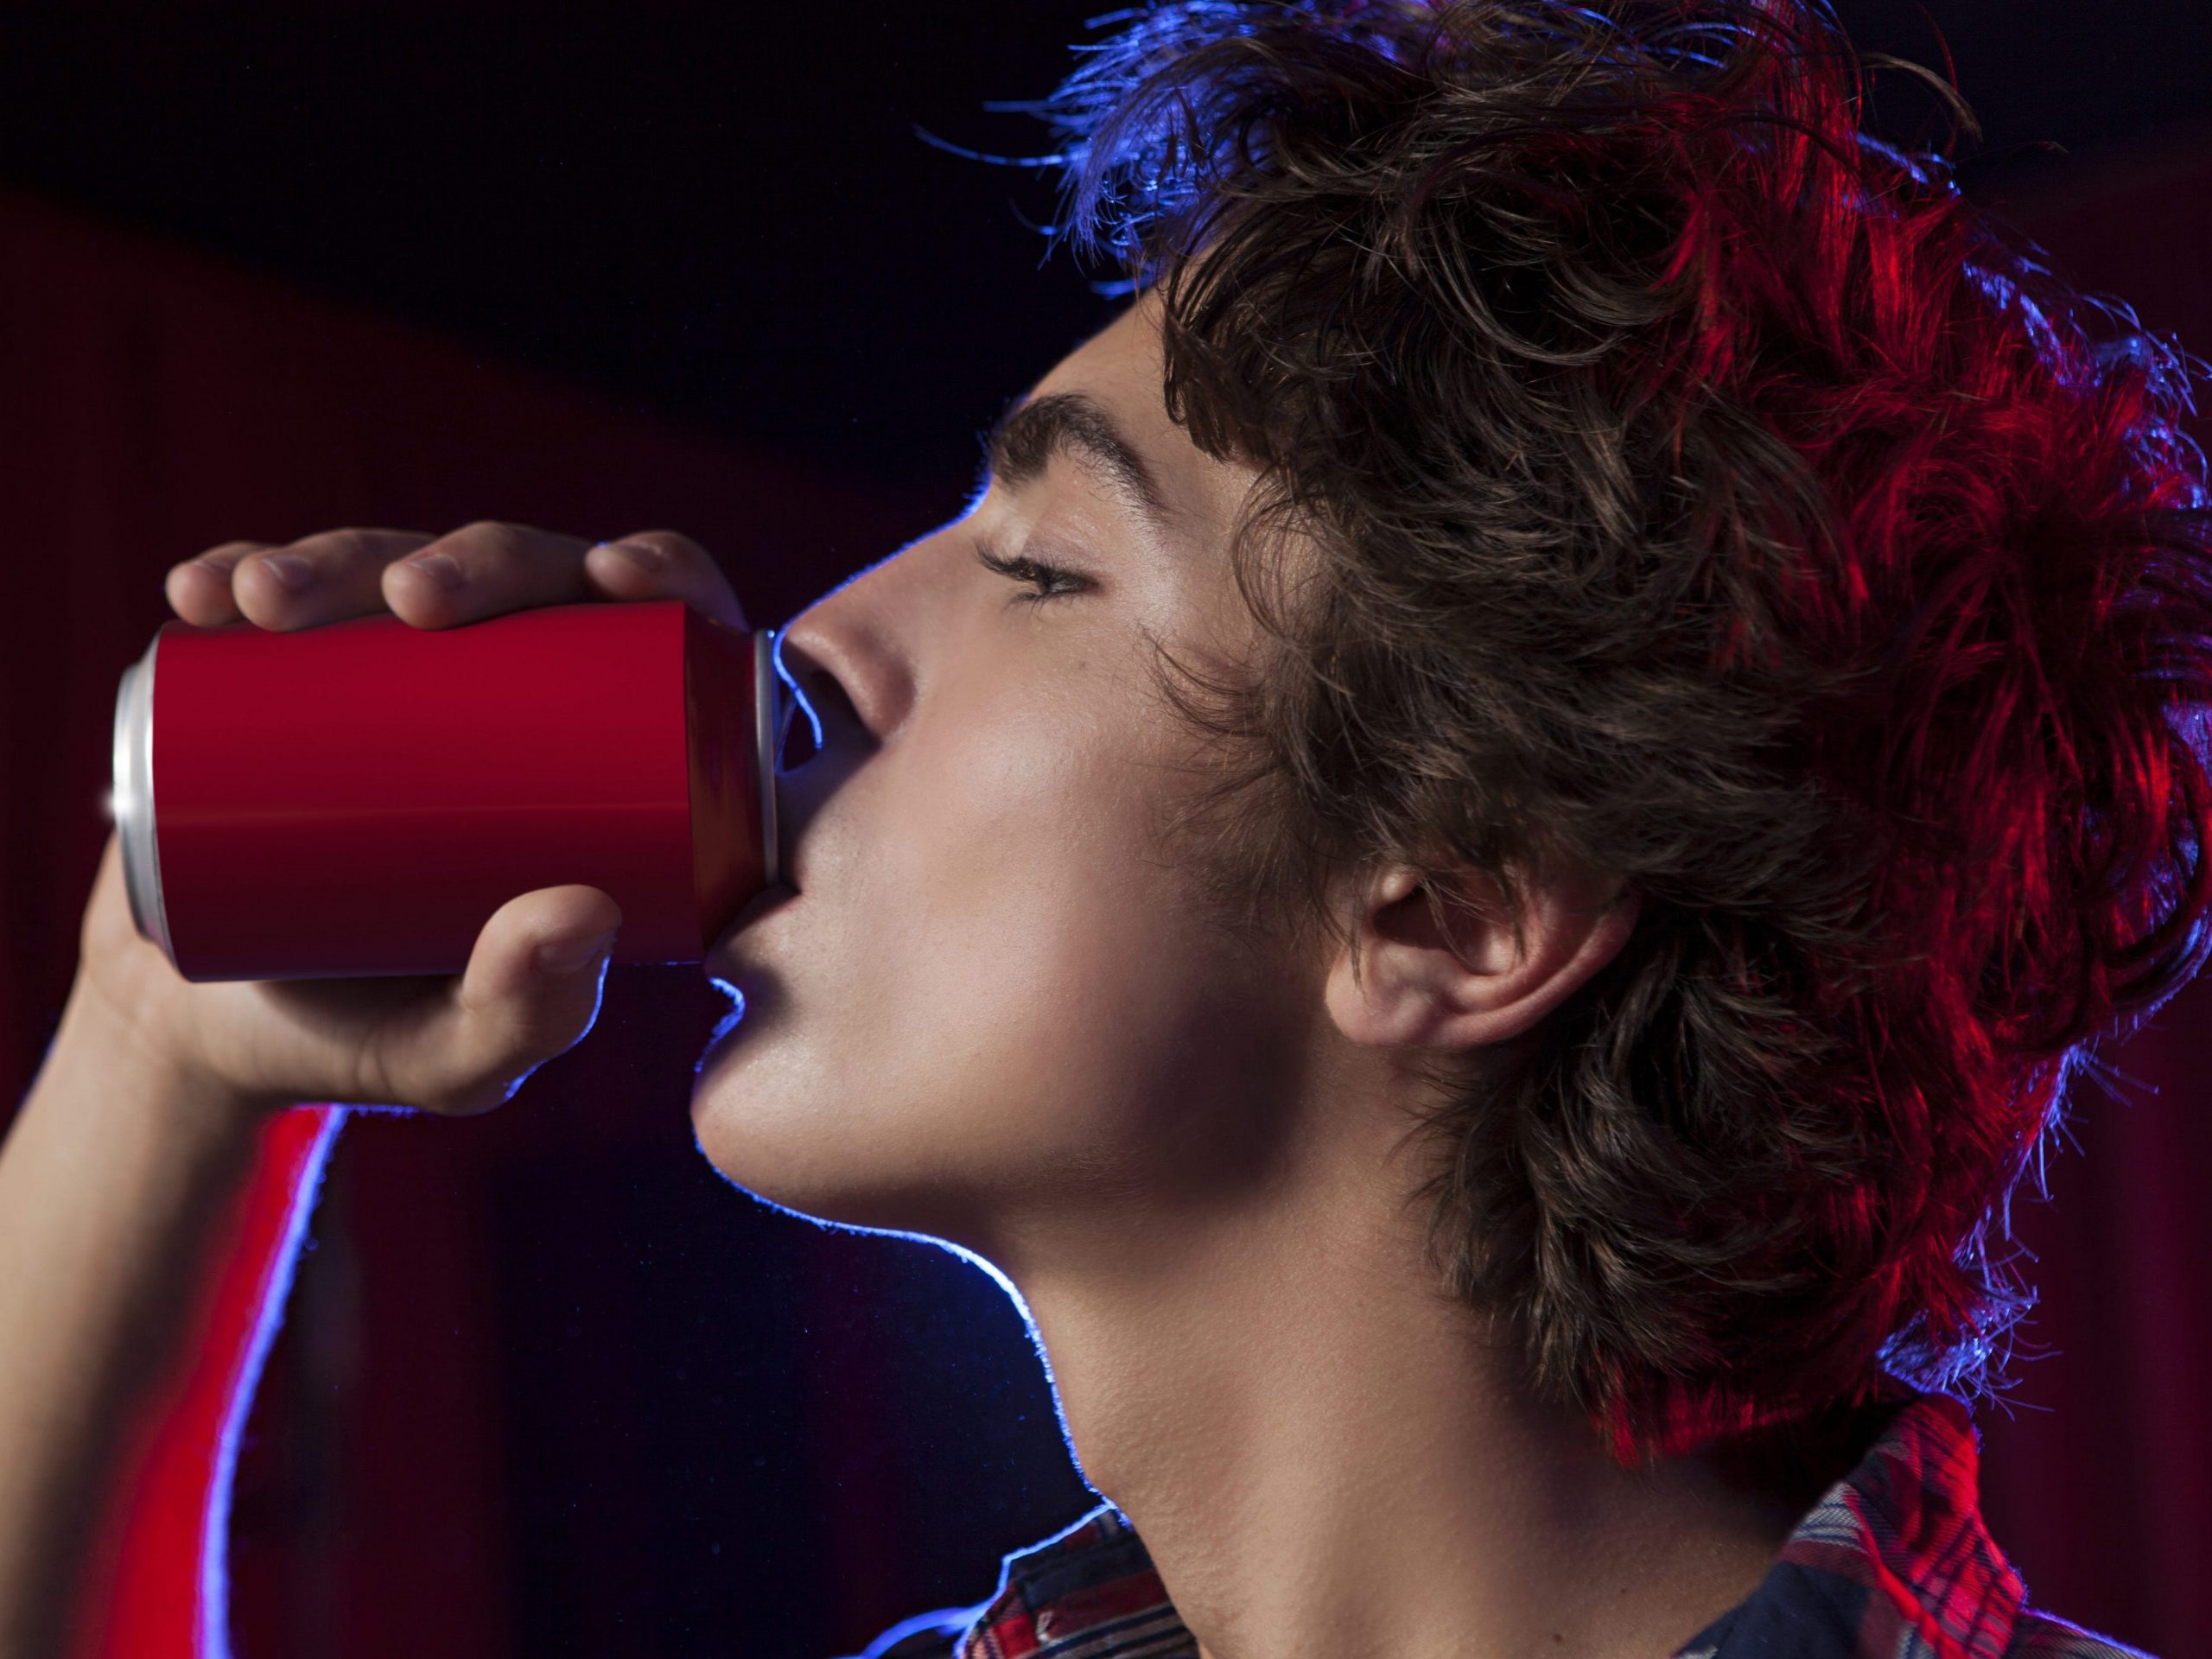 Young people are consuming rising levels of alcohol, experts warn.